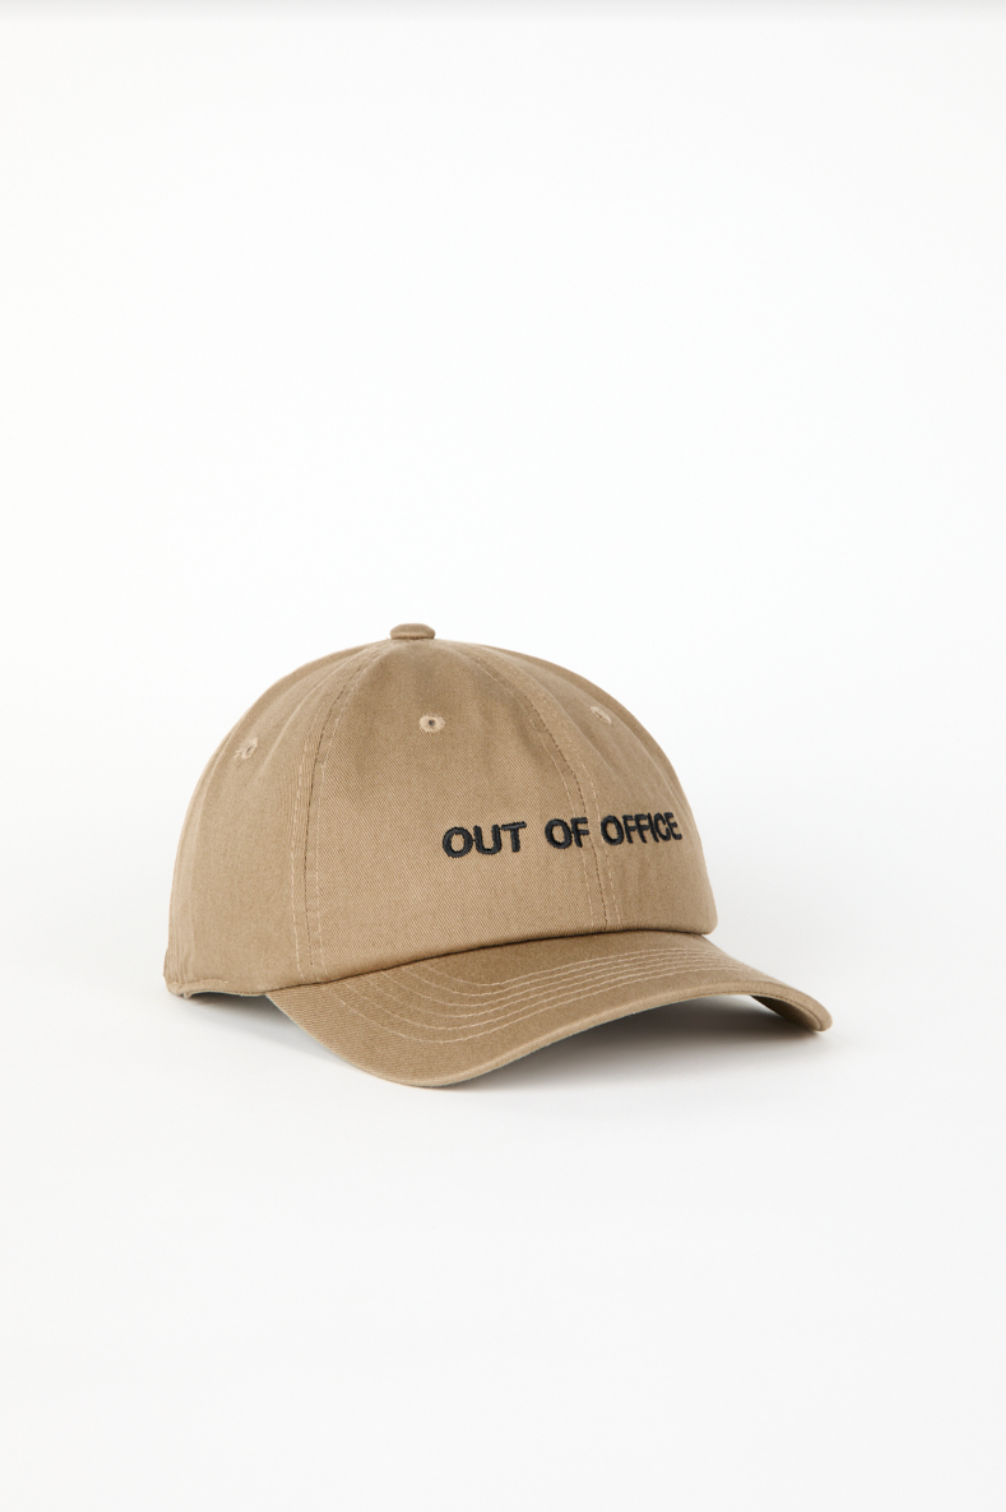 PRE ORDER "Out of Office" Cap by Intentionally Blank